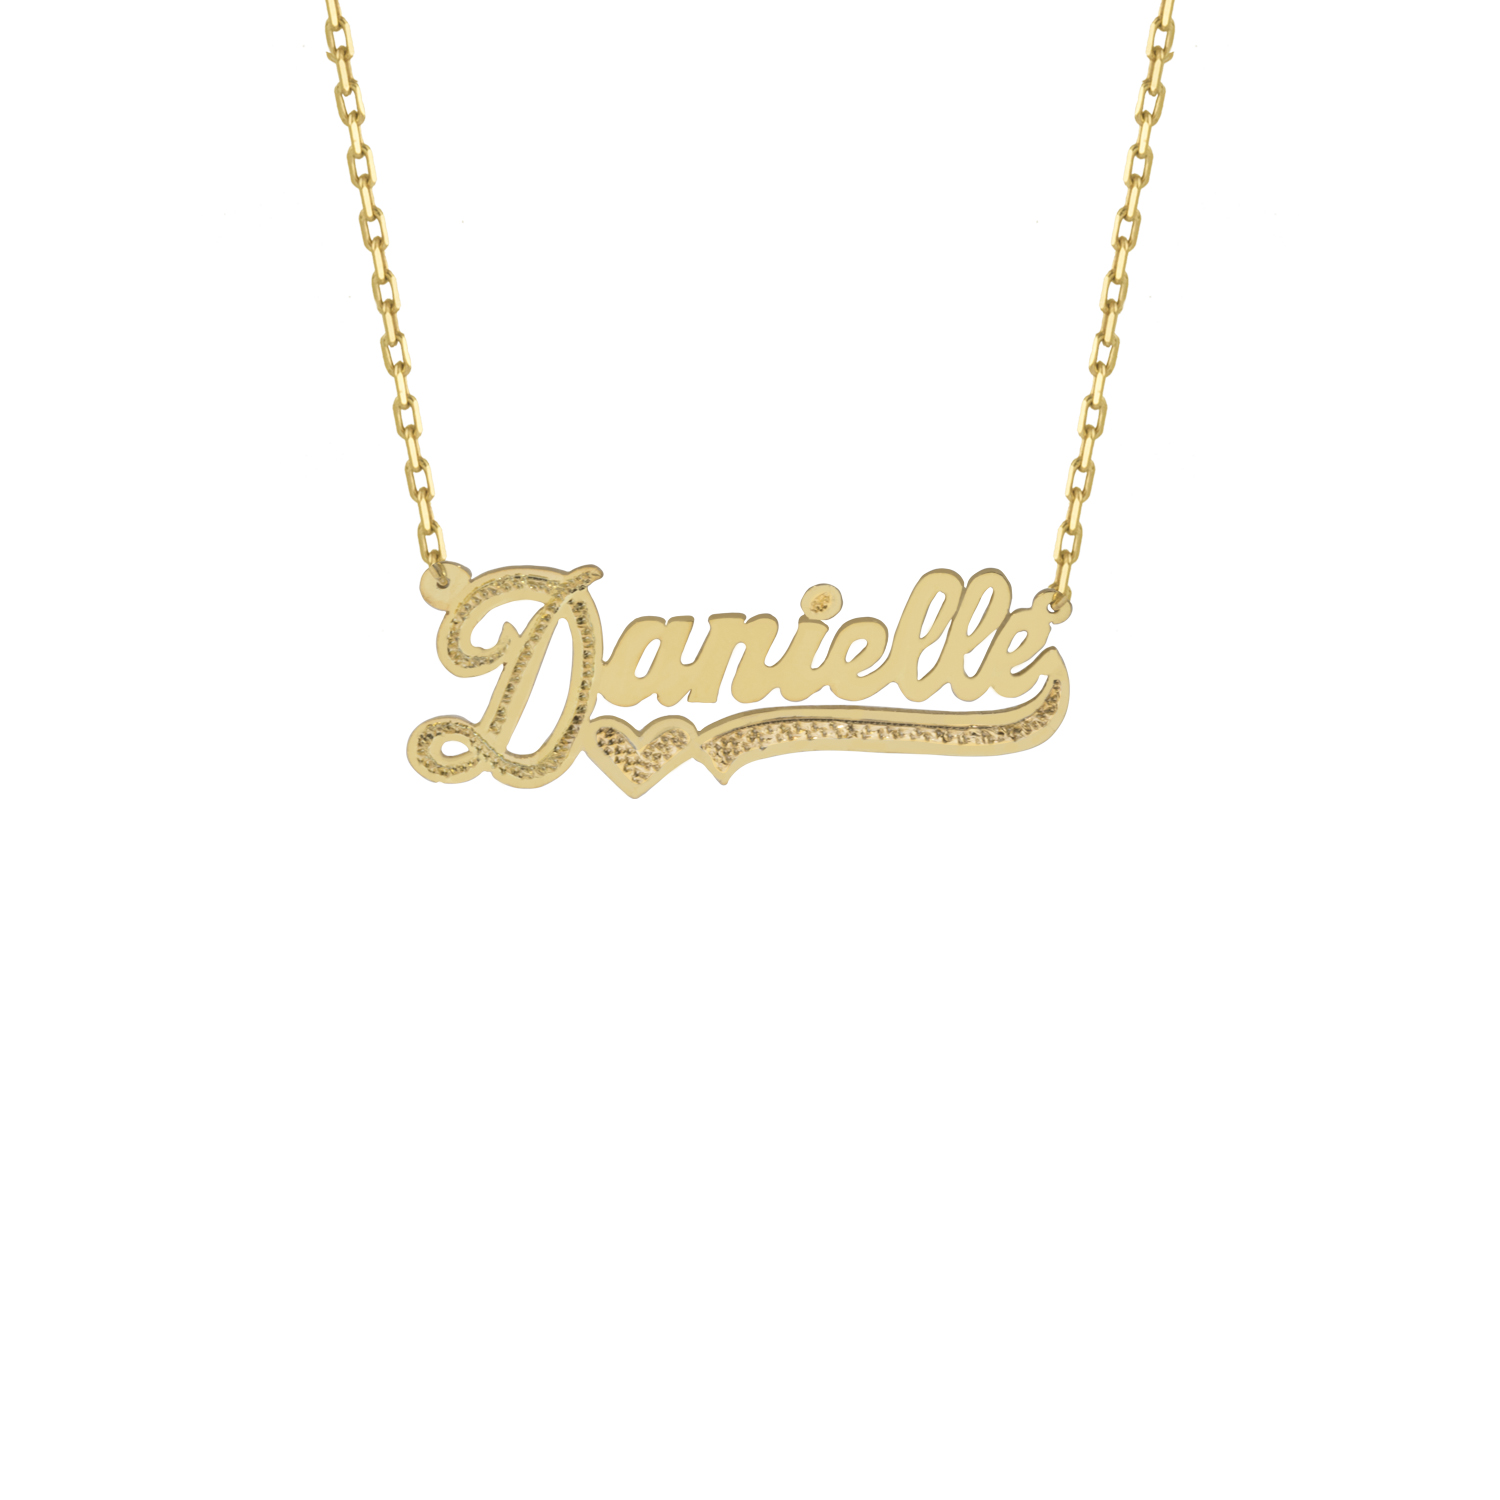 With 18 inch chain. Rylos Personalized 25MM Nameplate Necklace Sterling Silver or Yellow Gold Plated Silver Special Order Made to Order